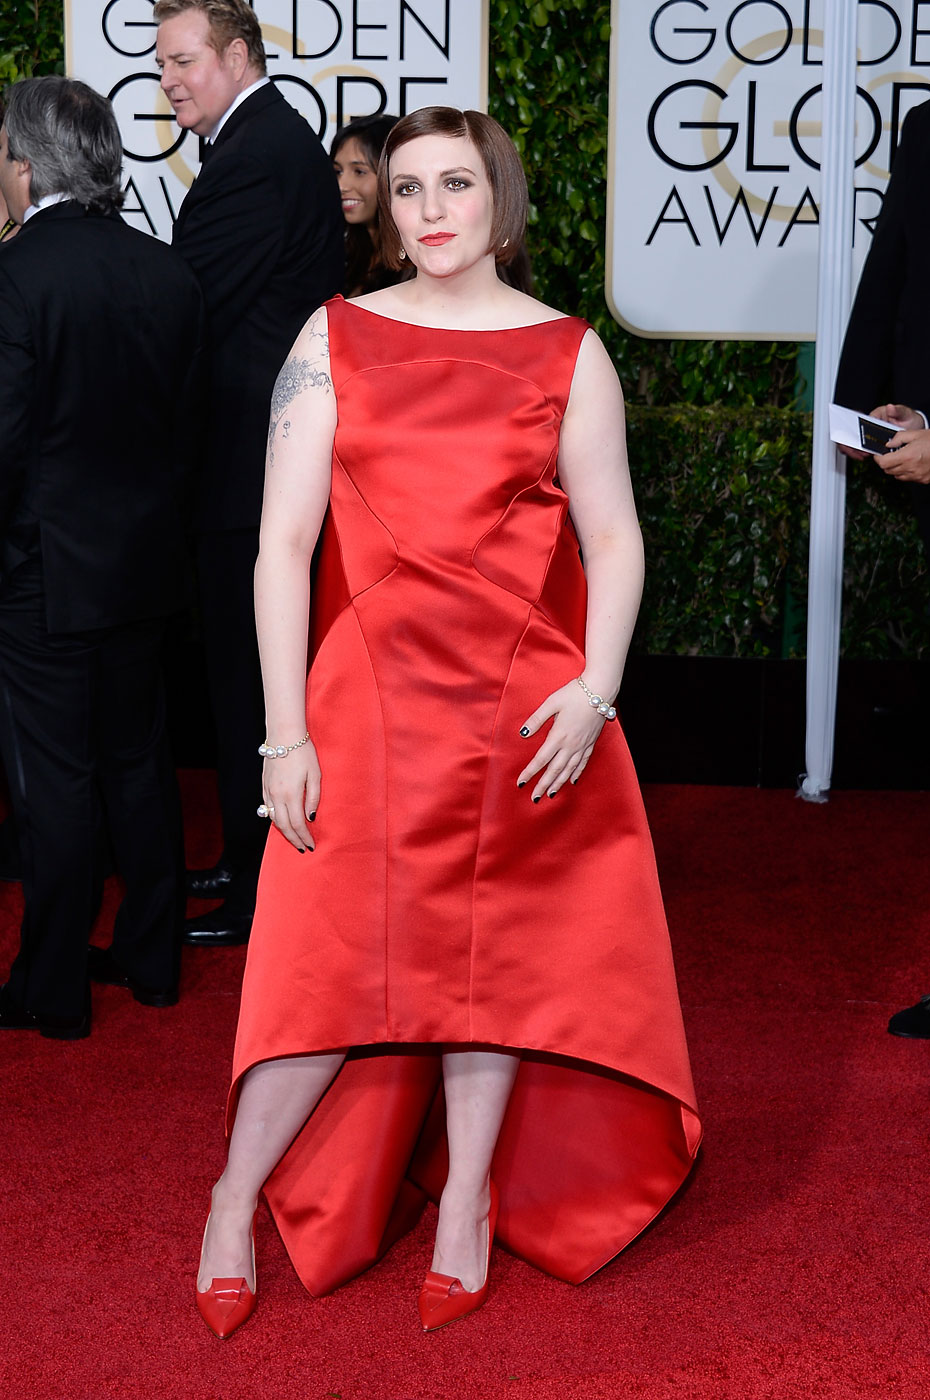 Lena Dunham arrives to the 72nd Annual Golden Globe Awards held at the Beverly Hilton Hotel on Jan. 11, 2015 in Beverly Hills, Calif.